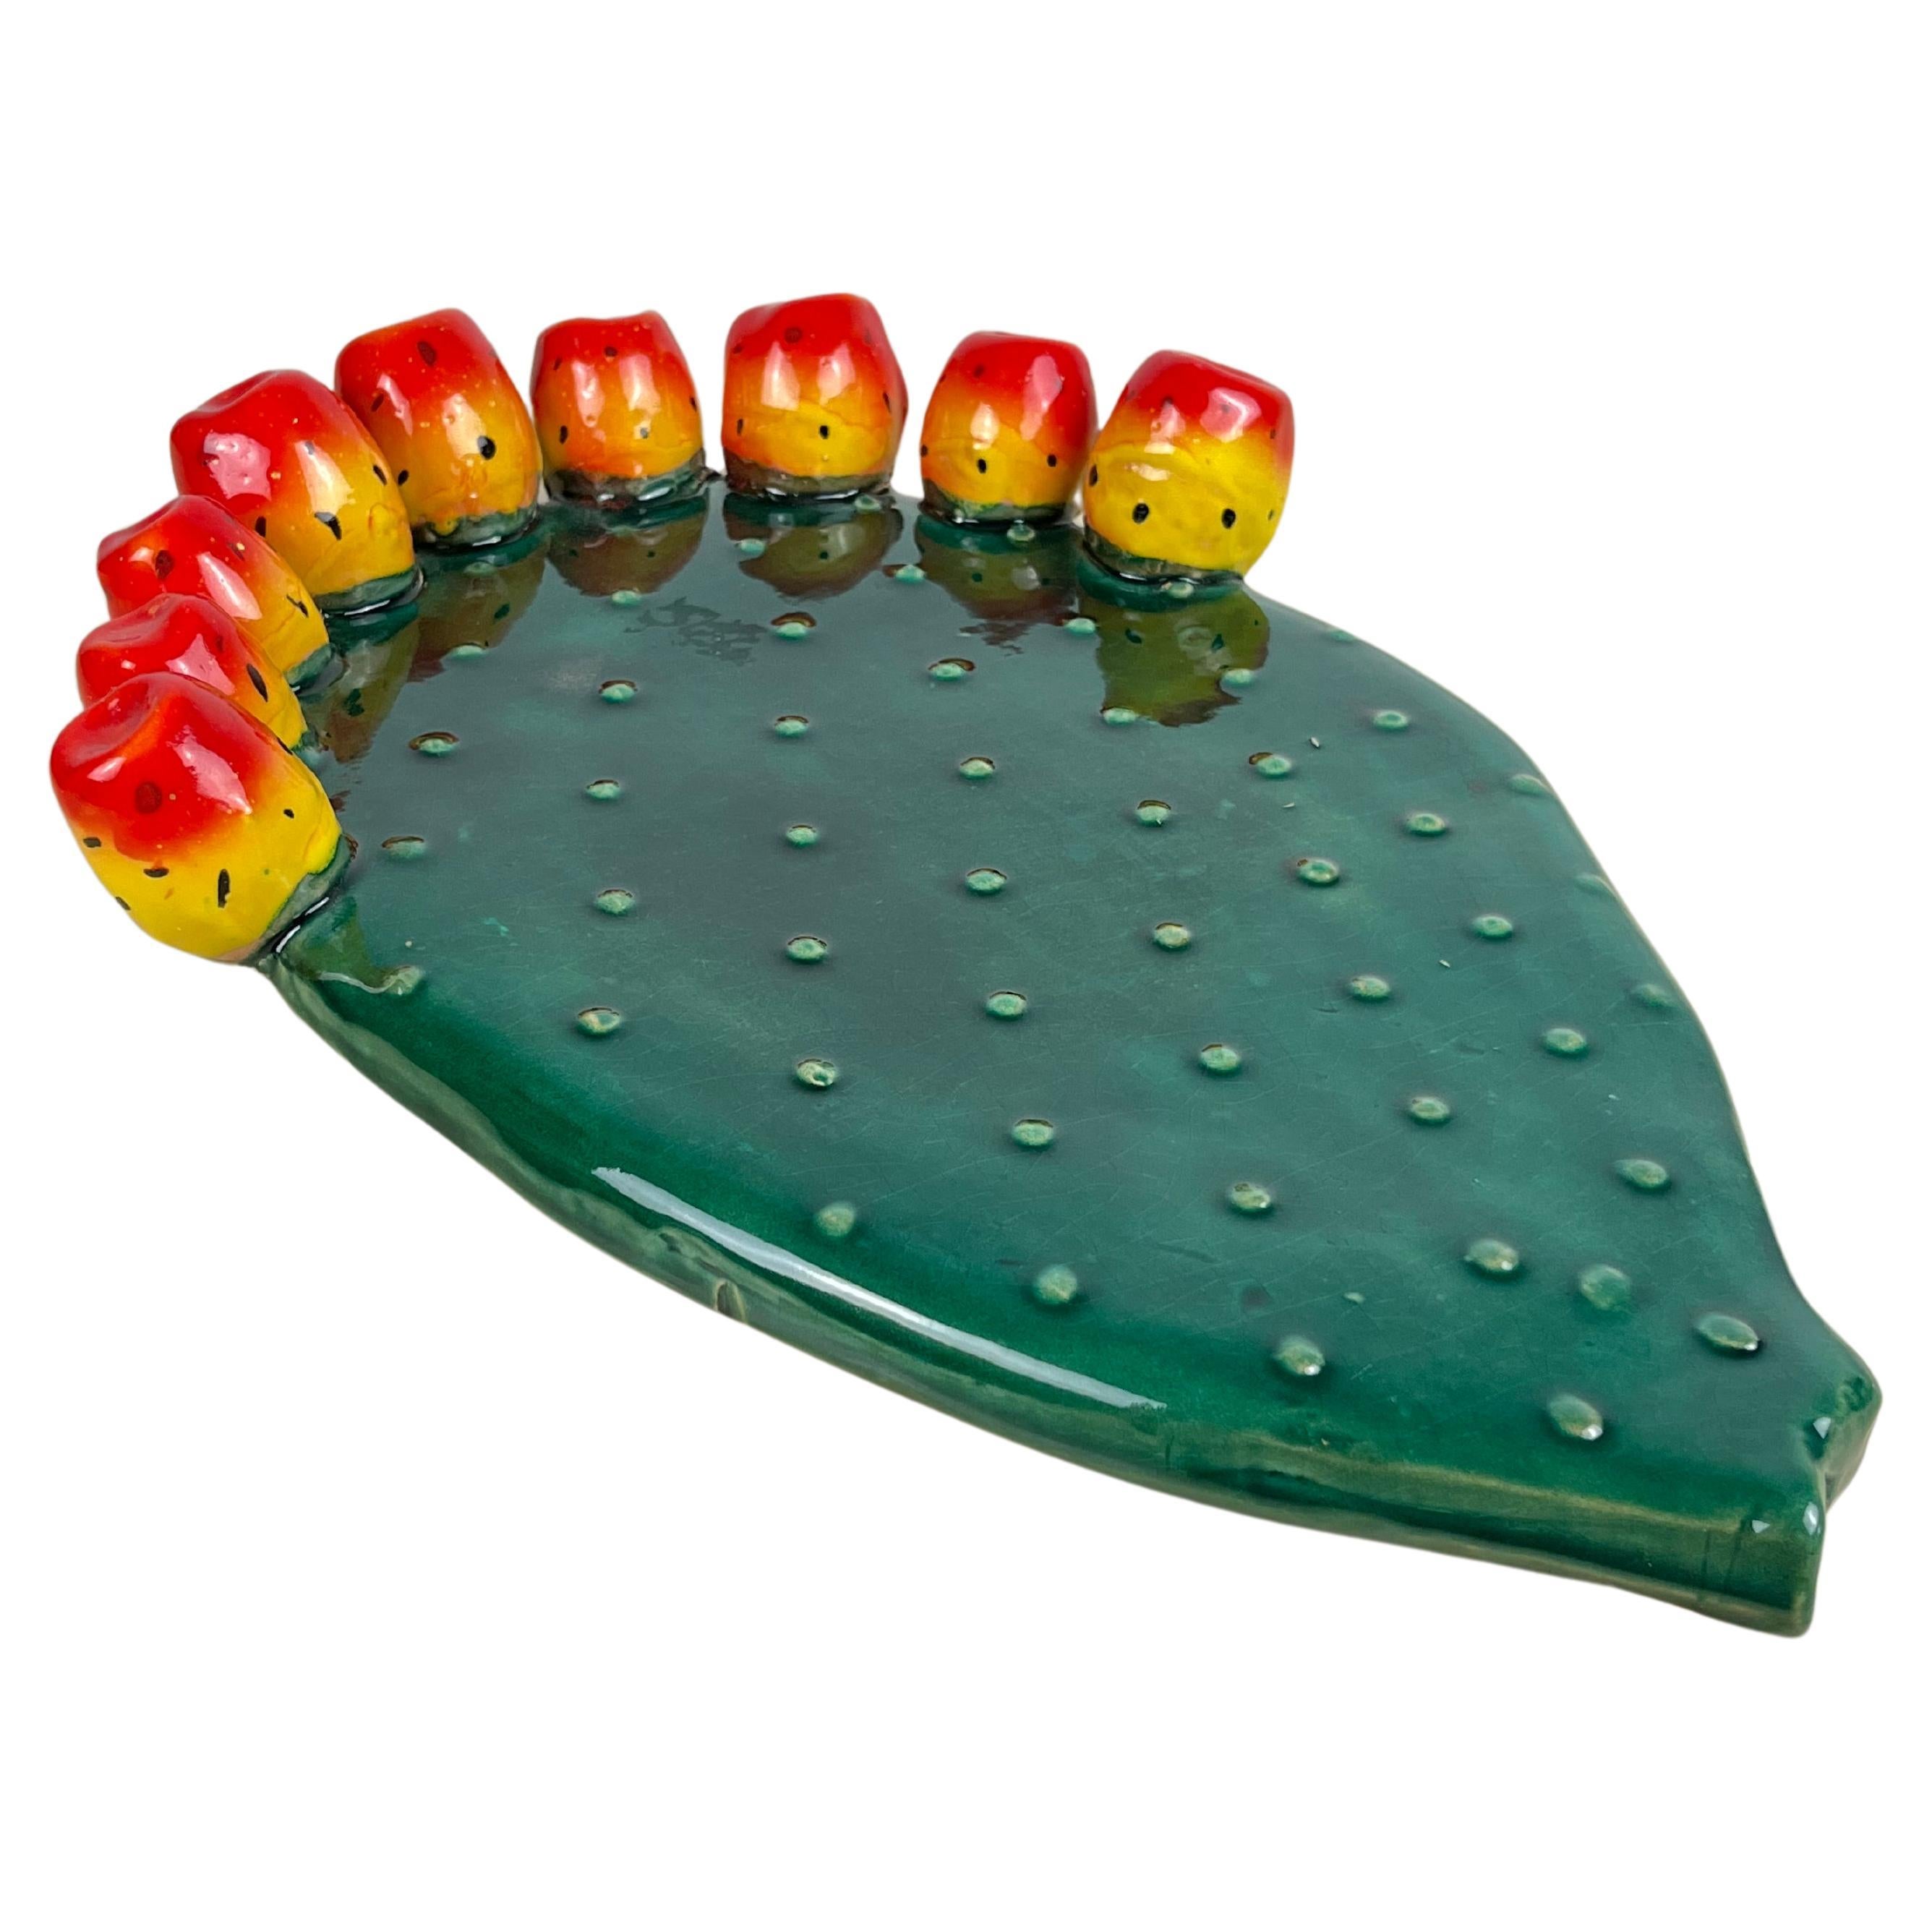 Sicilian glazed terracotta wall decoration, Italy, 1980s
Reproduced a shovel of prickly pears.
It is in excellent condition.